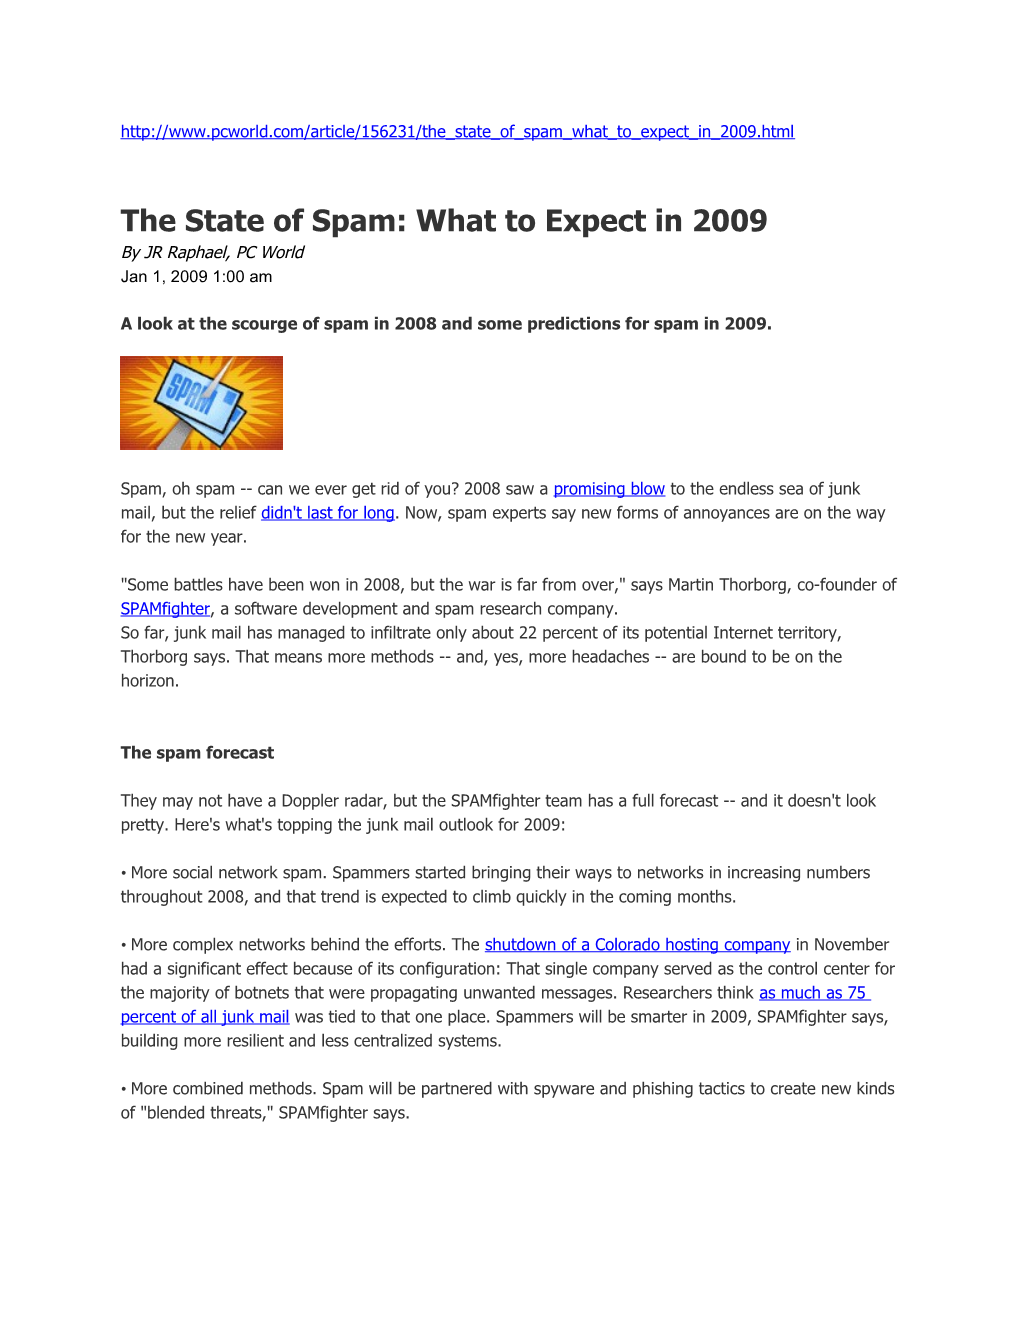 The State of Spam: What to Expect in 2009